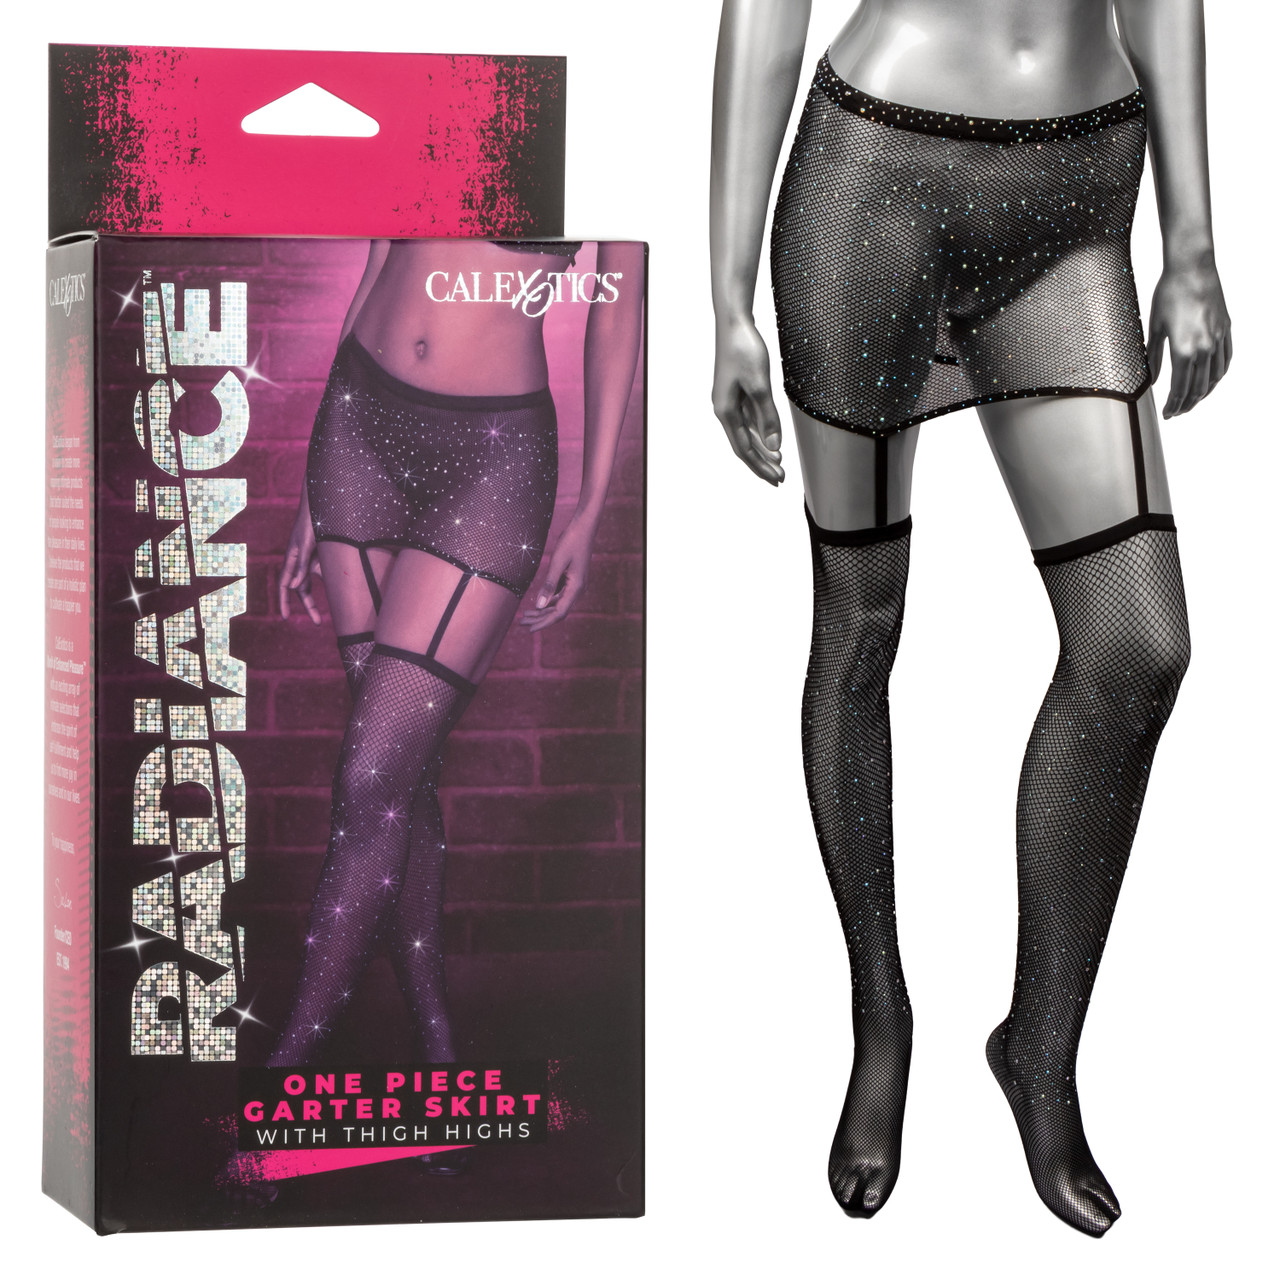 RADIANCE 1PC GARTER SKIRT W/ THIGH HIGHS - Click Image to Close